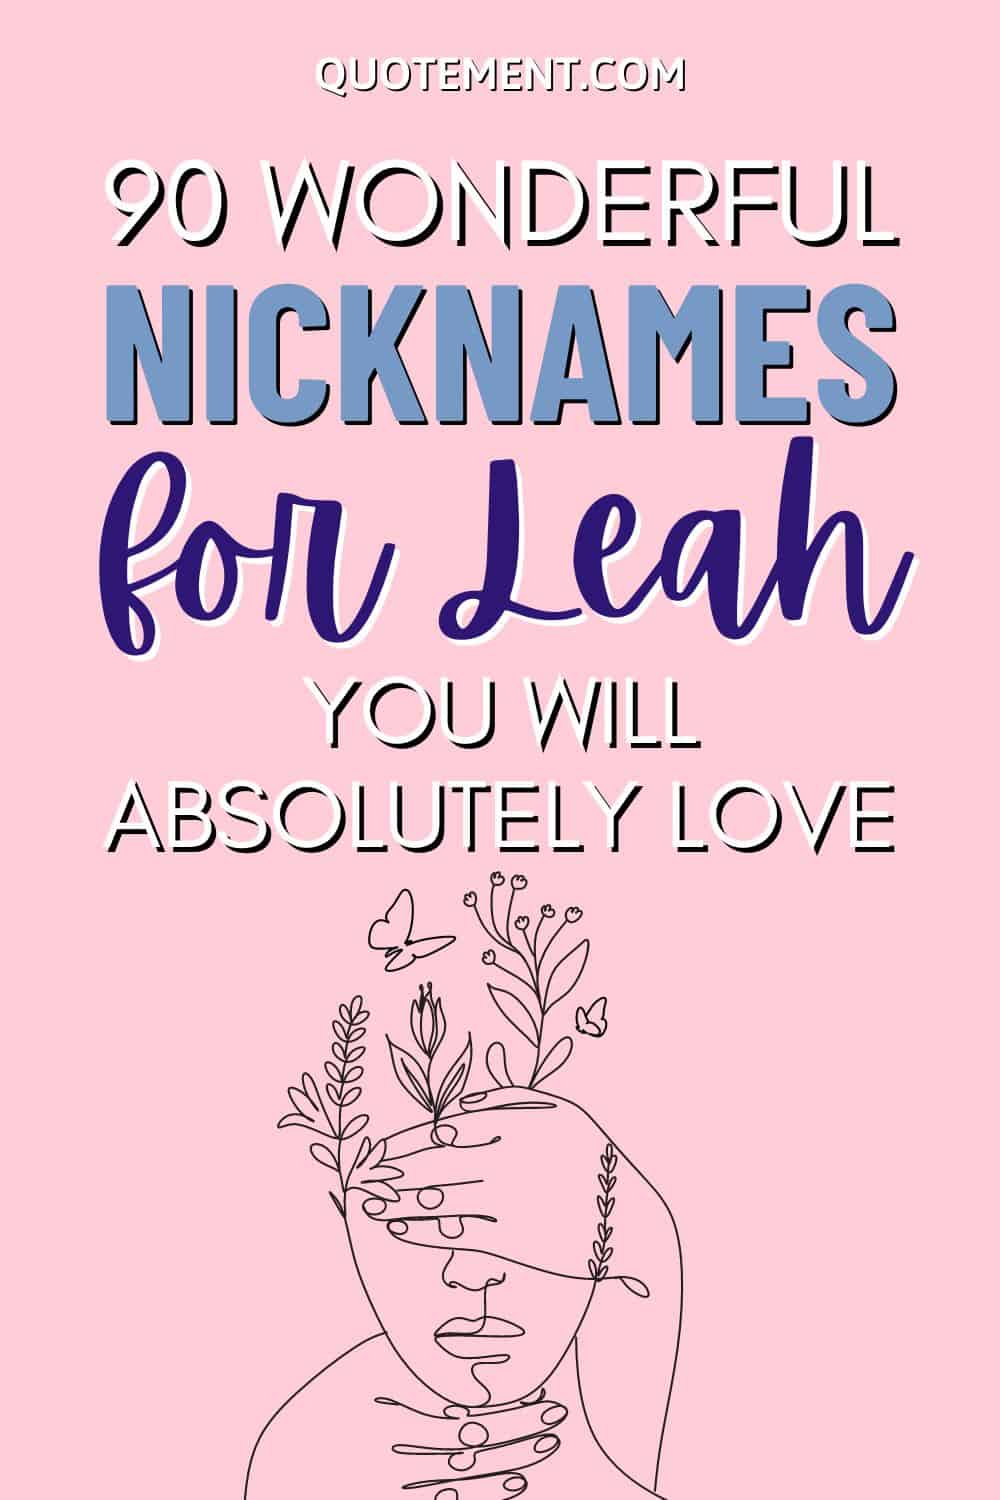 90 Wonderful Nicknames For Leah You Will Absolutely Love